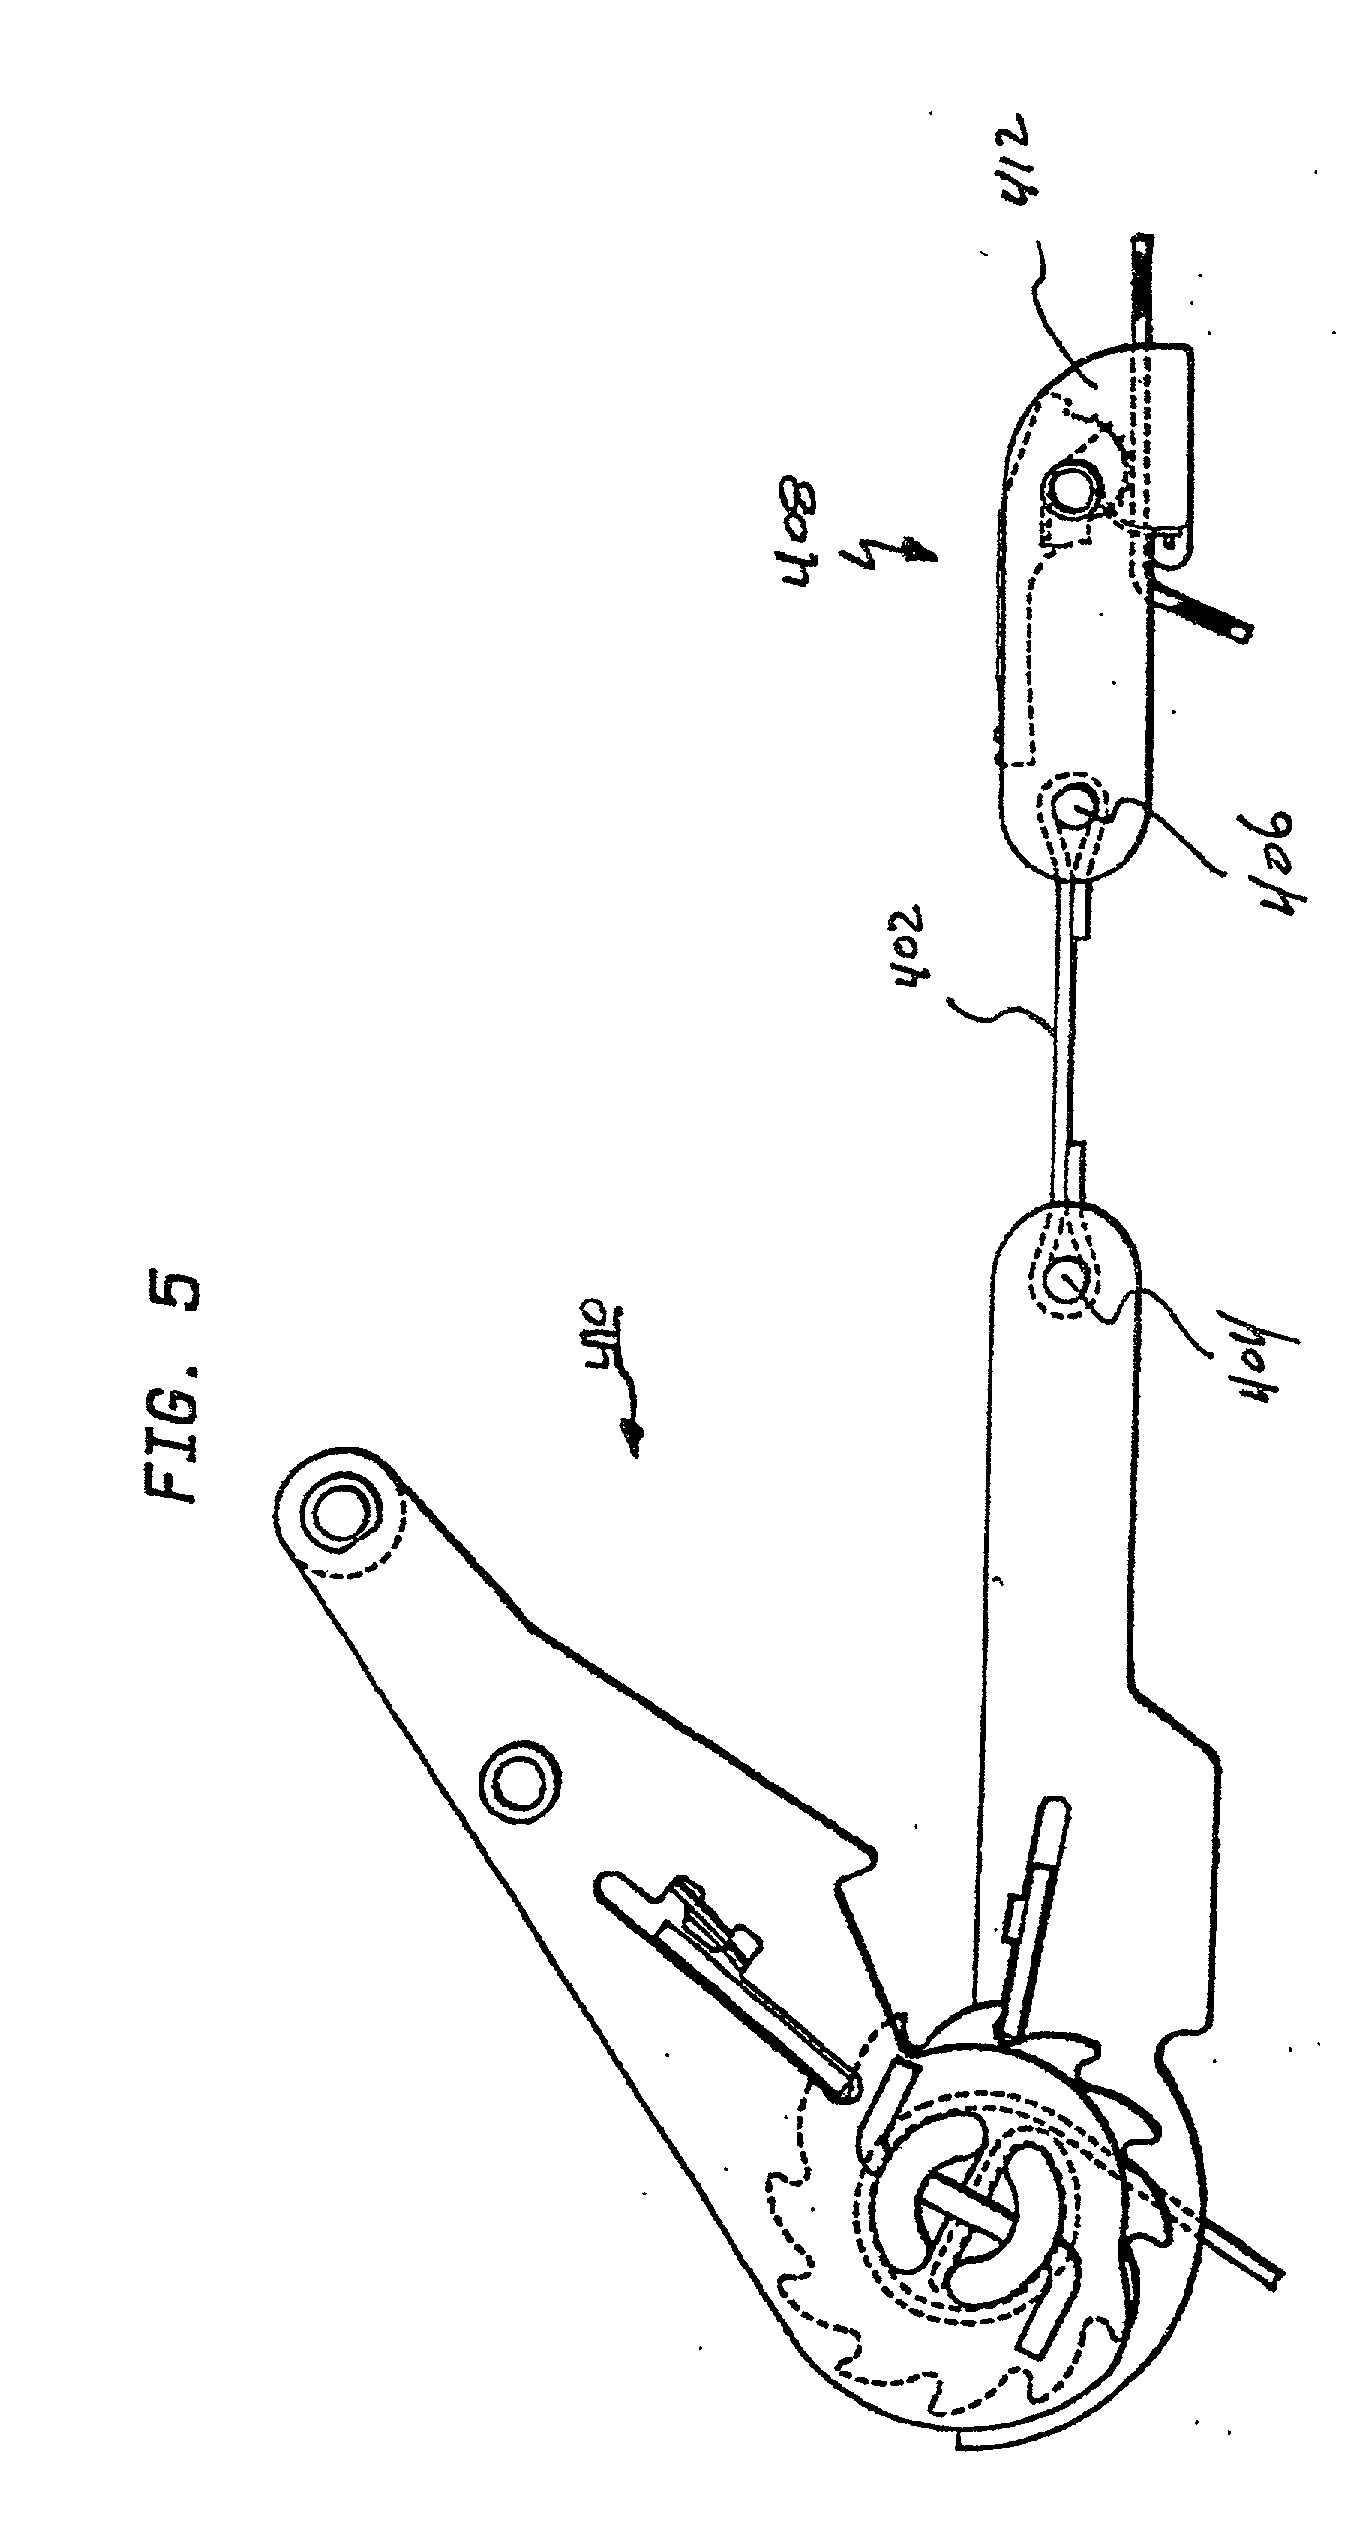 Ratchet and cam buckle tensioning assembly and method for using same